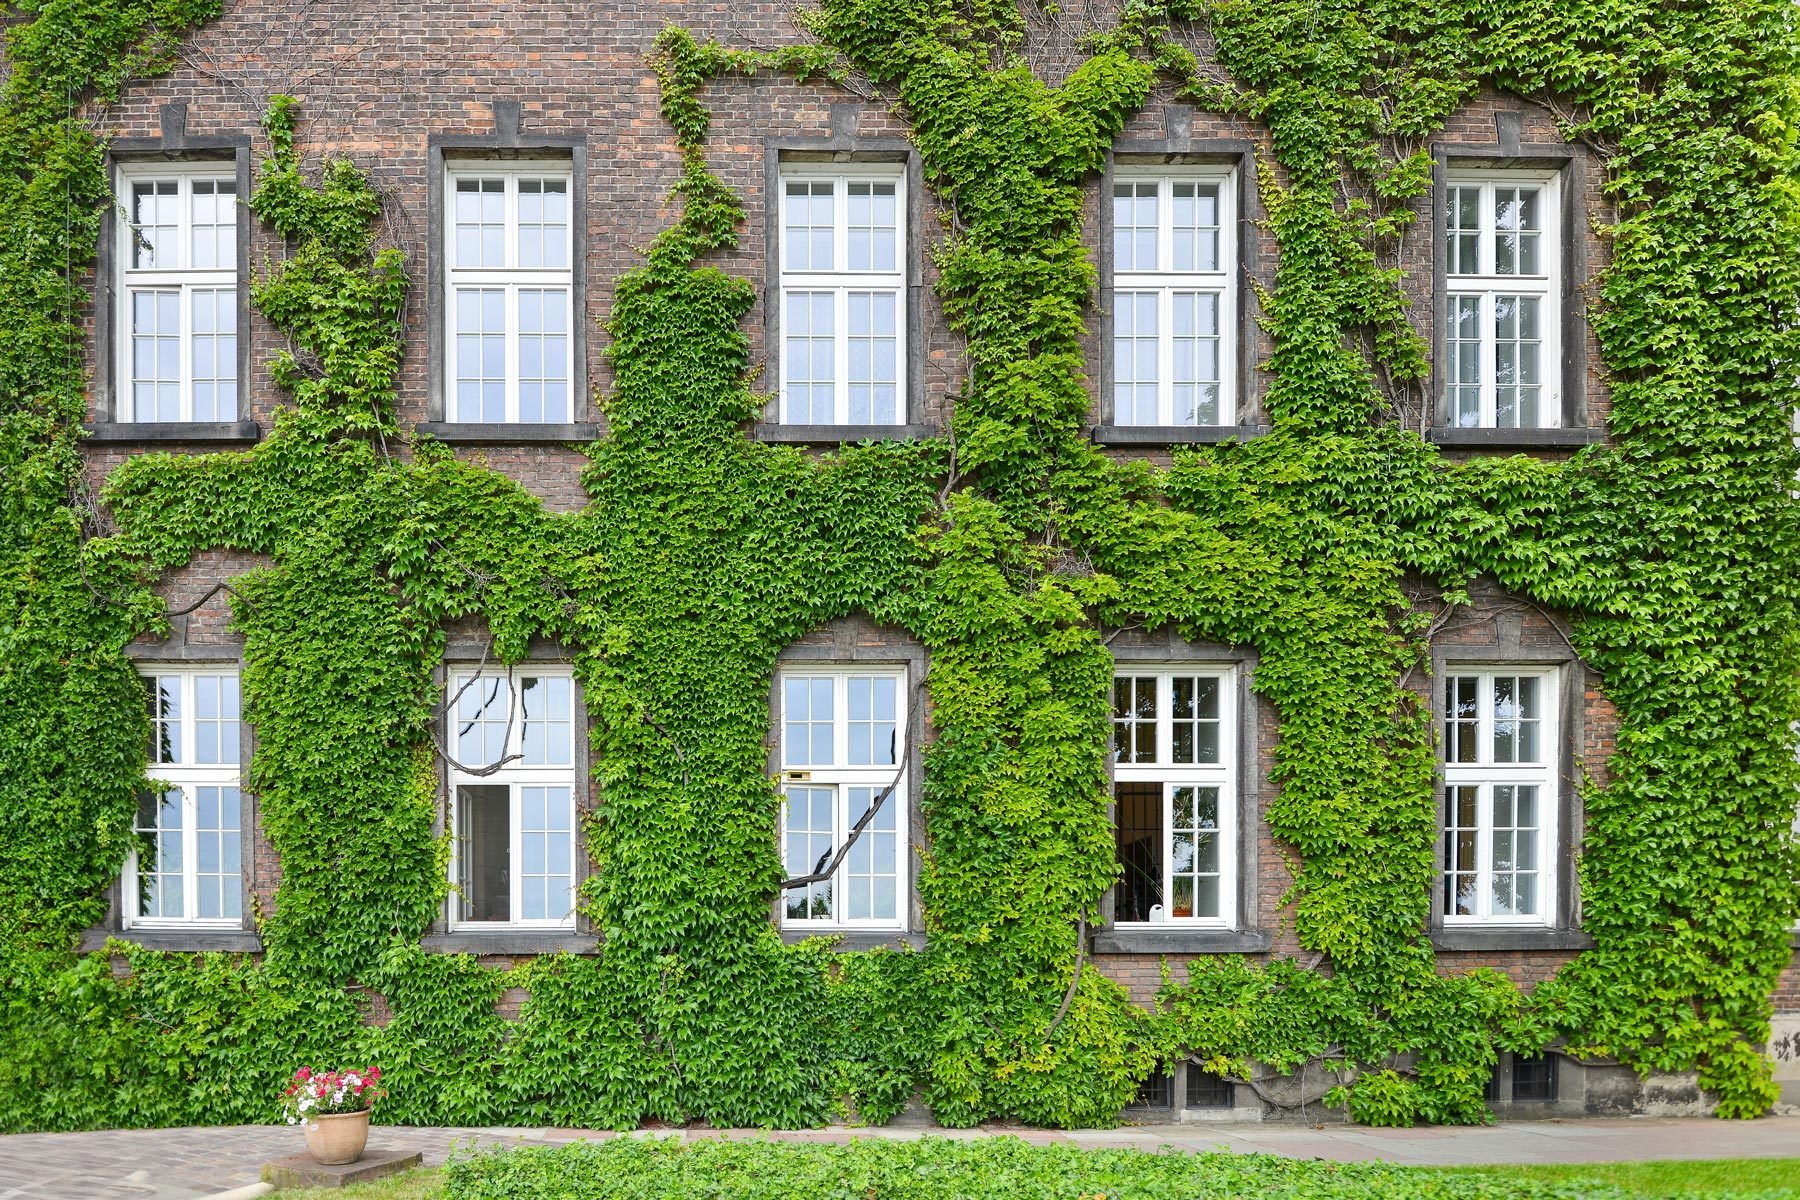 Covered With Ivy Wall Of House With Window